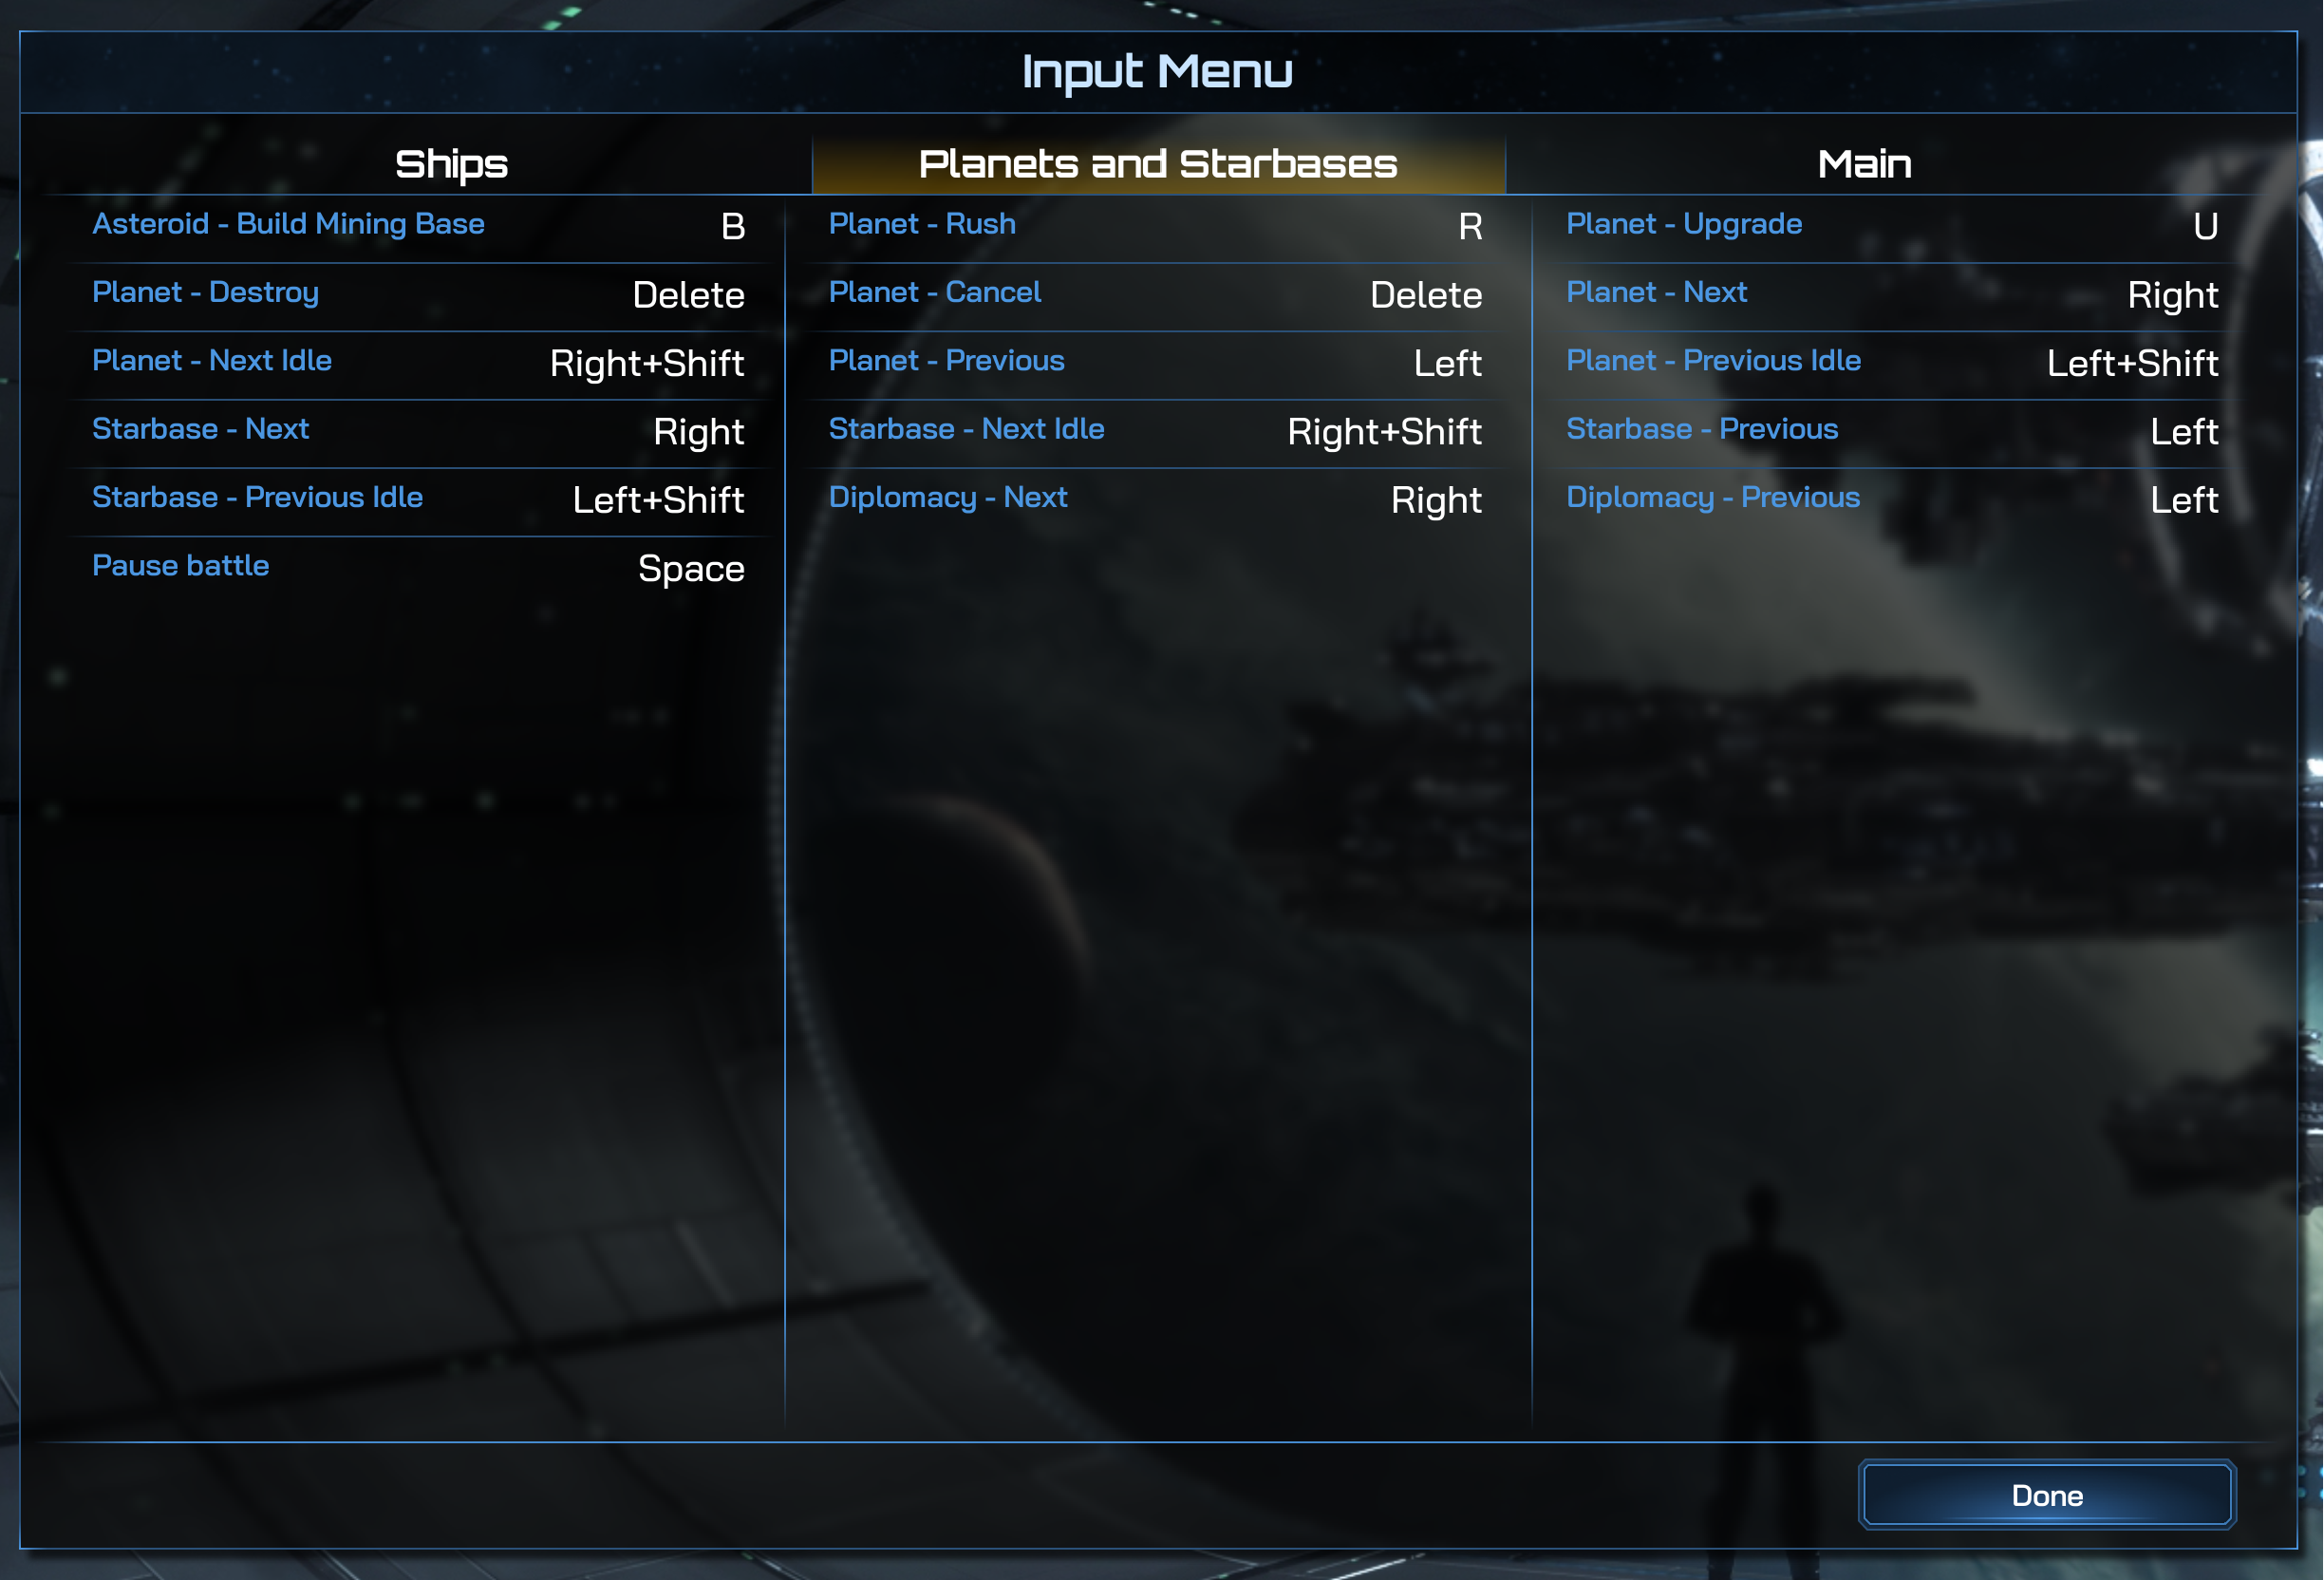 Planet and Starbase Menu